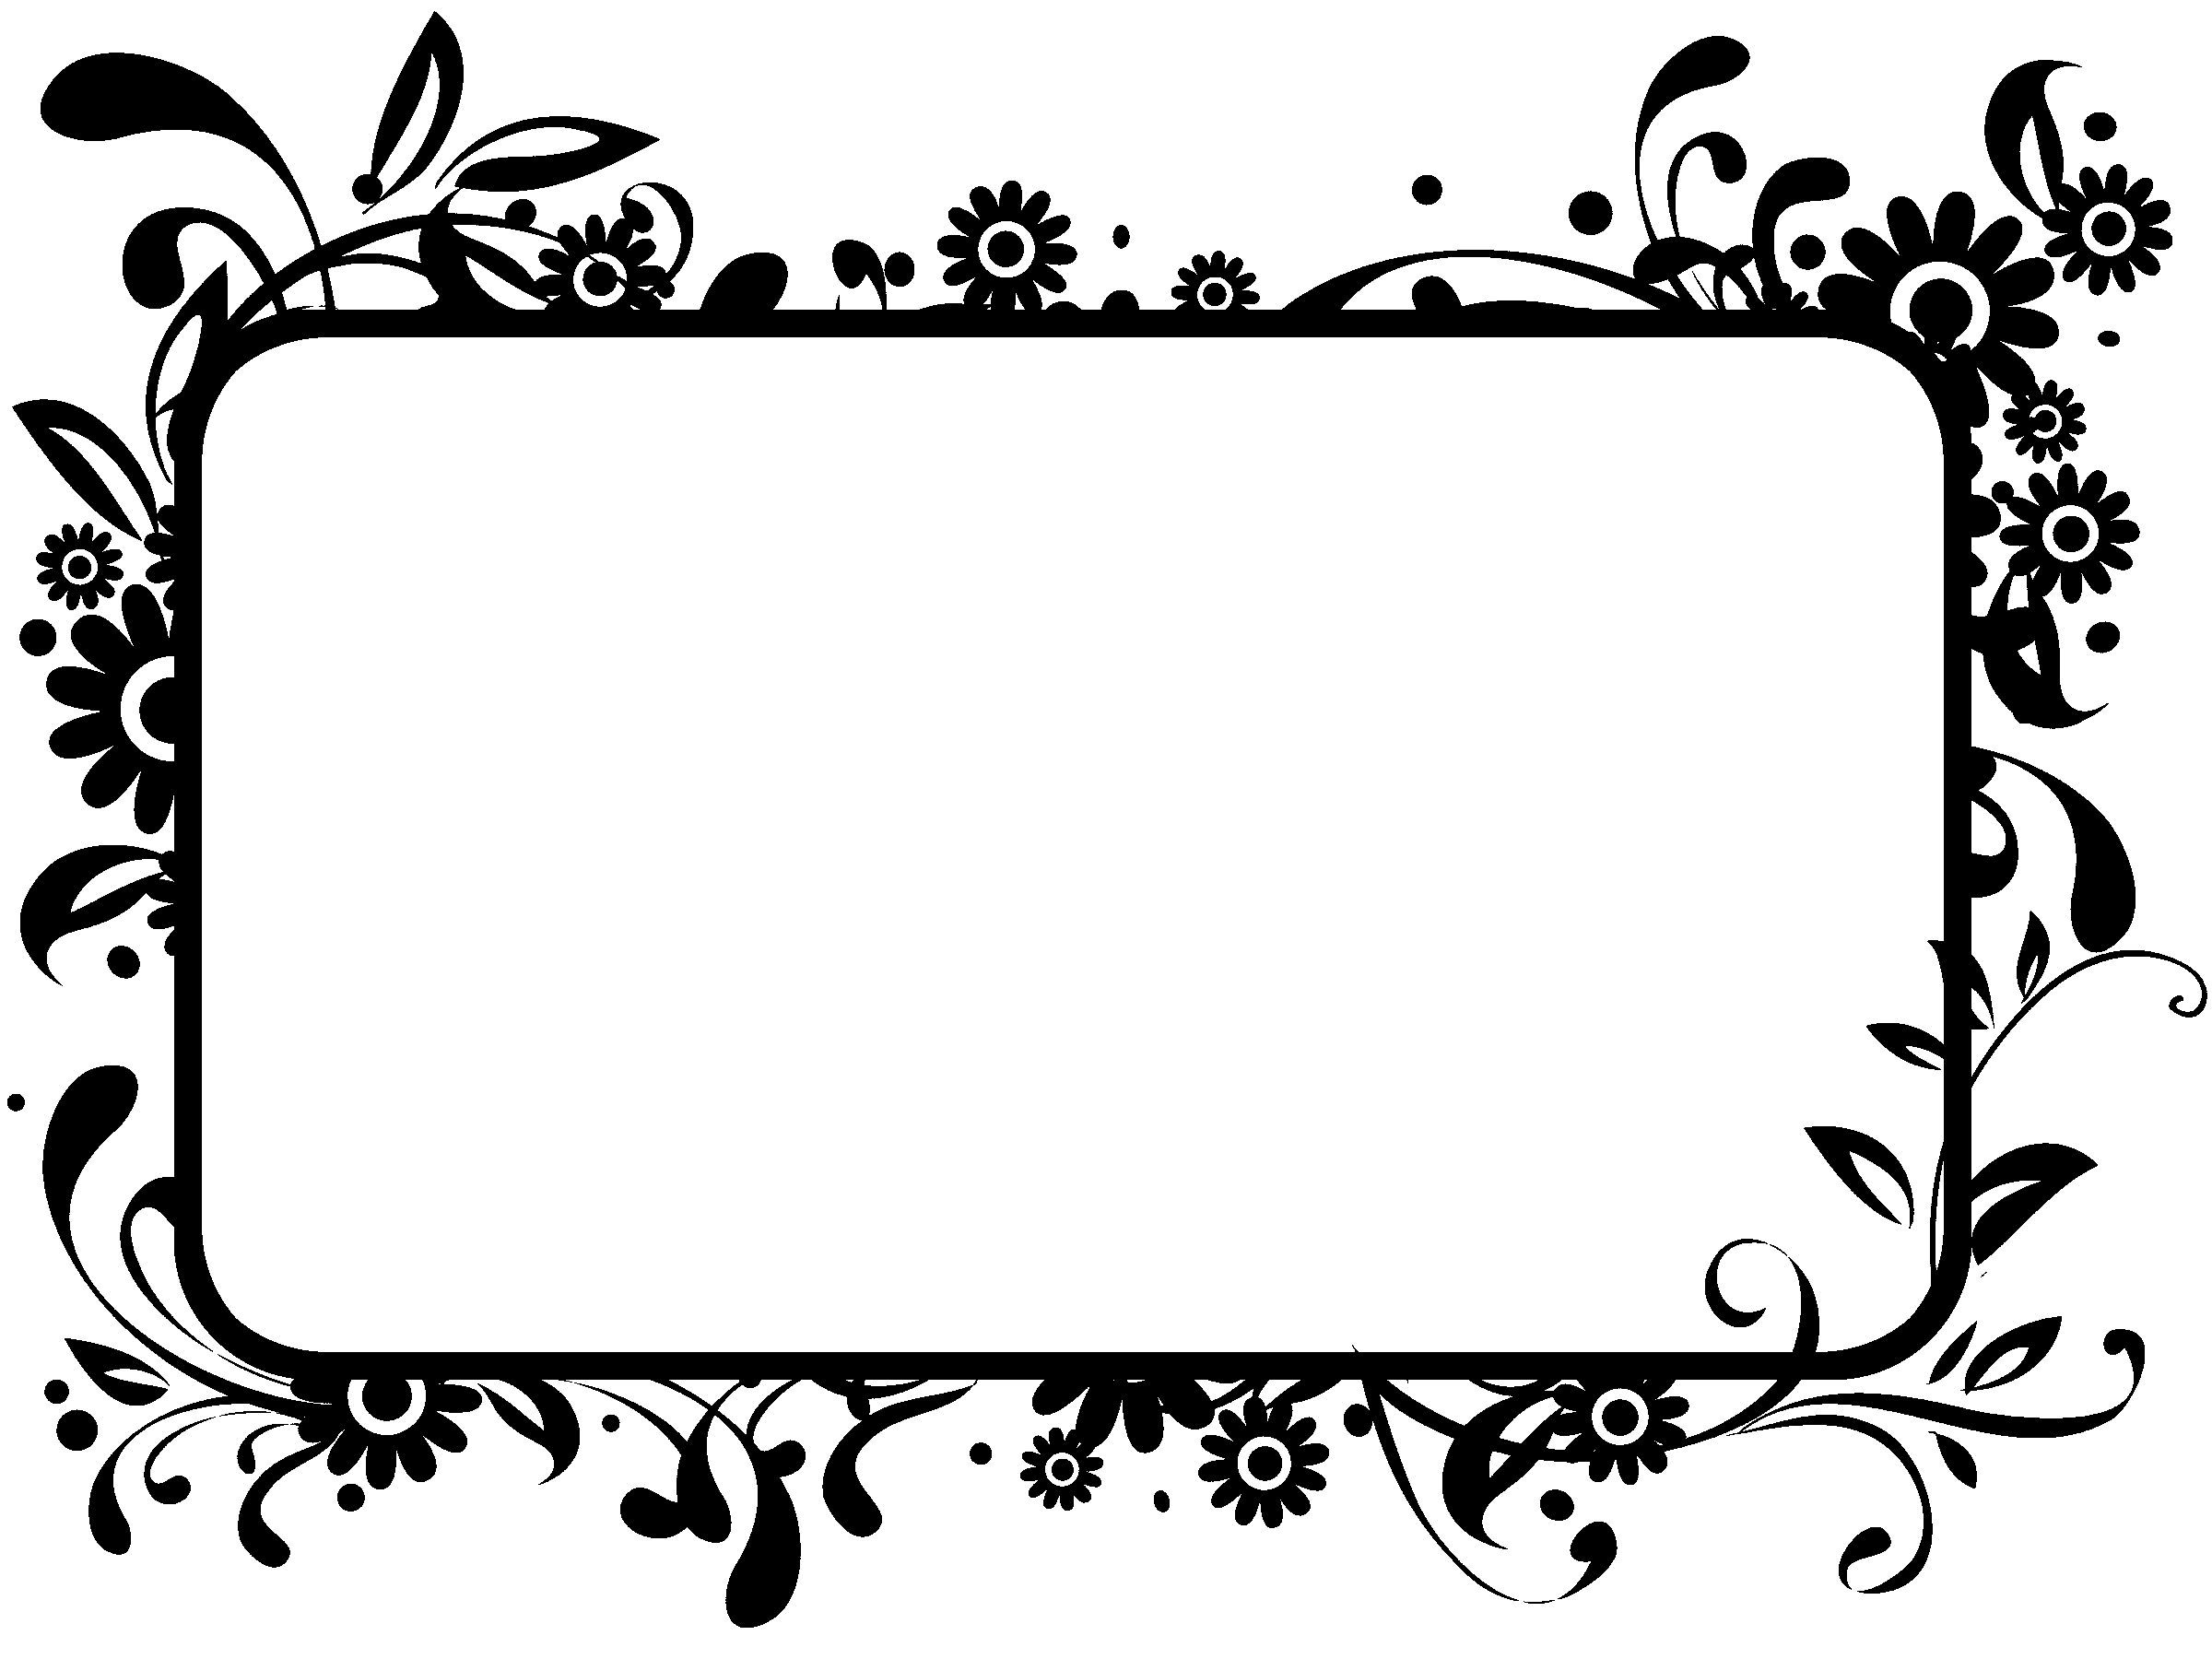 Free Frame Clip Art of Picture frame clip art border clipart image for your  personal projects, presentations or web designs.